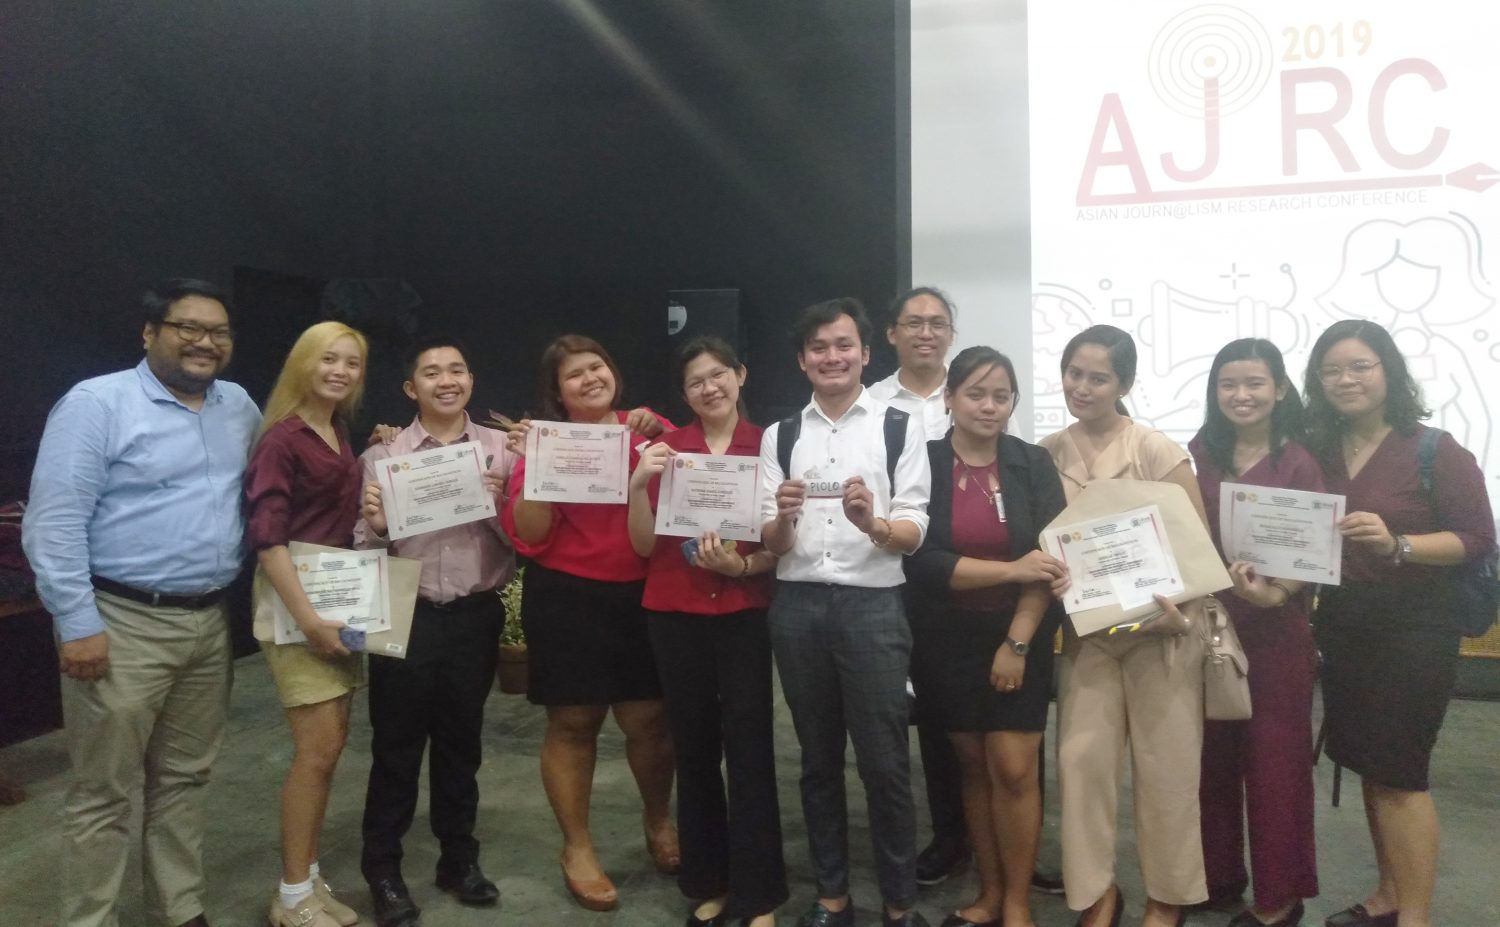 Journ students victorious in research competition